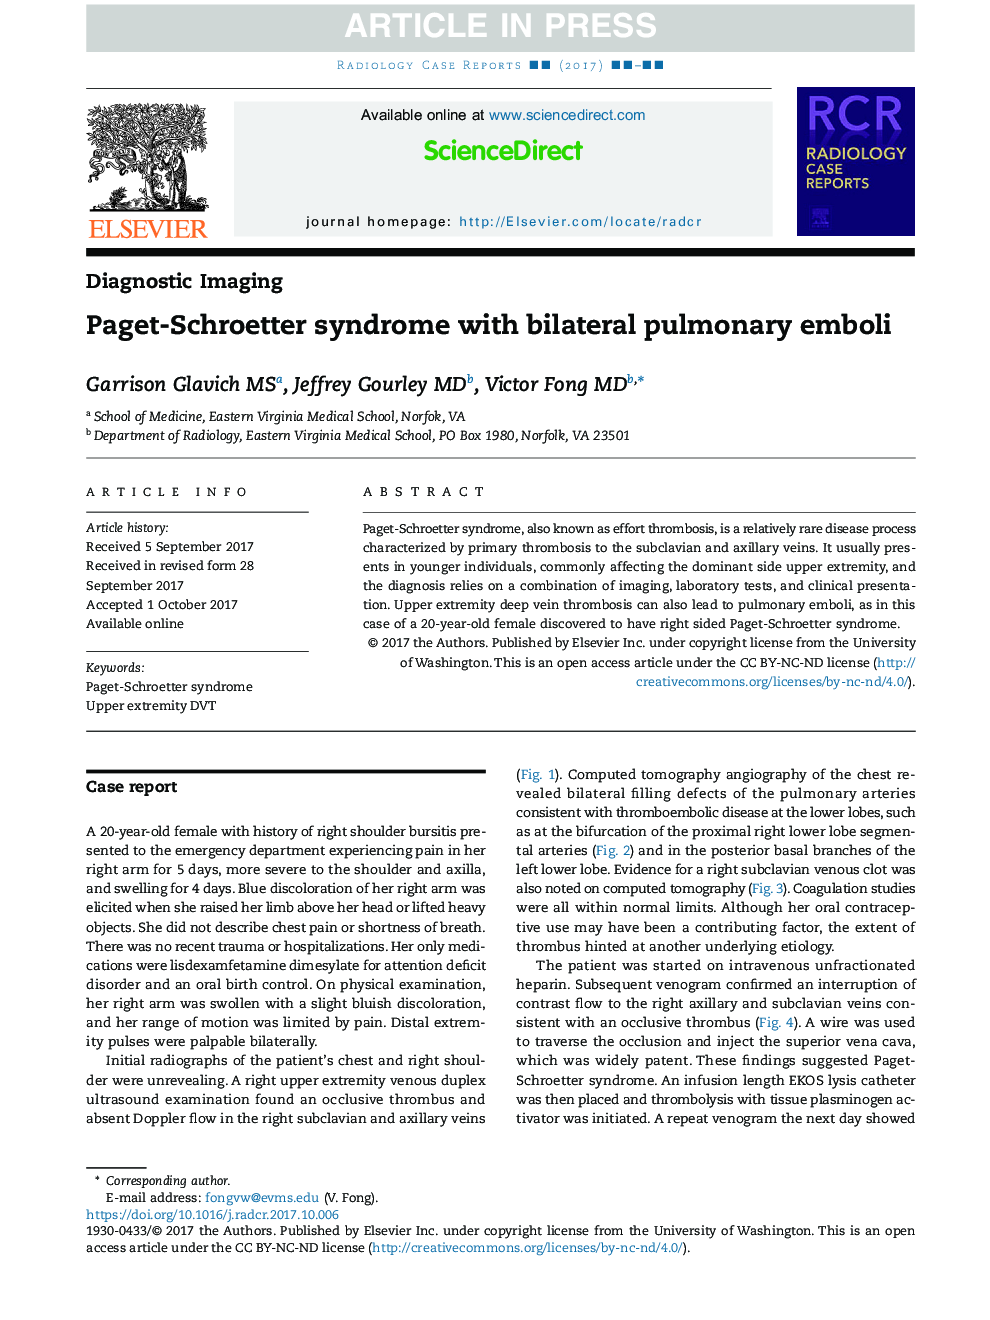 Paget-Schroetter syndrome with bilateral pulmonary emboli